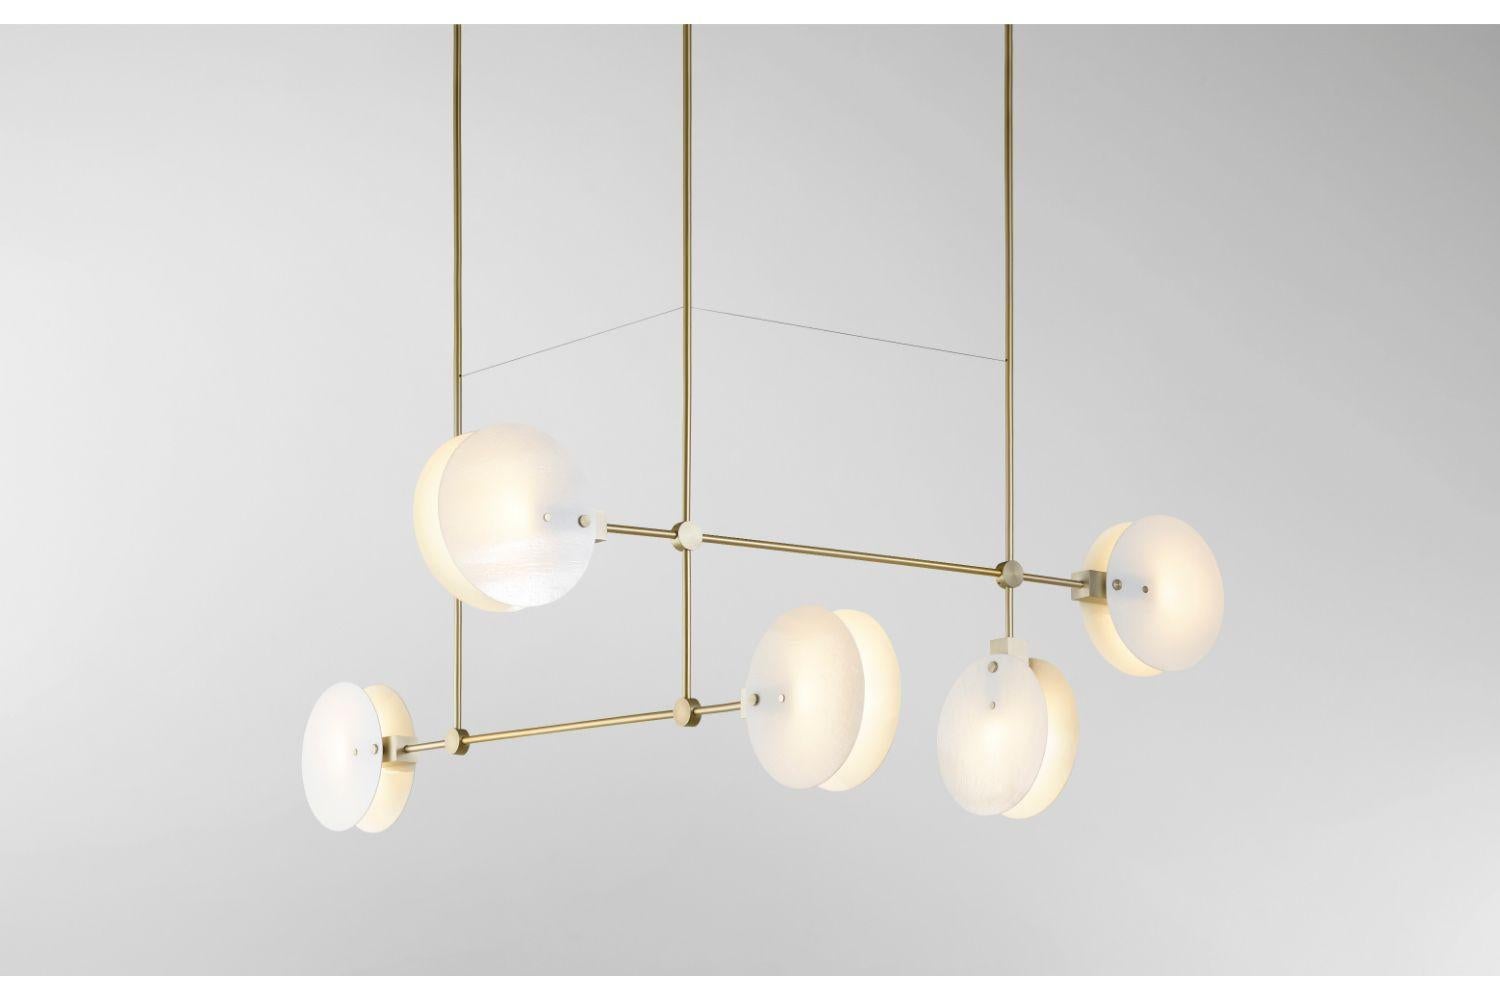 The Nebulae Collection takes its name from the natural phenomena of interstellar clouds and their dynamic layered lighting effects. The geometric machined forms coupled with the fluid glass discs create balance between the elements.

Designed for